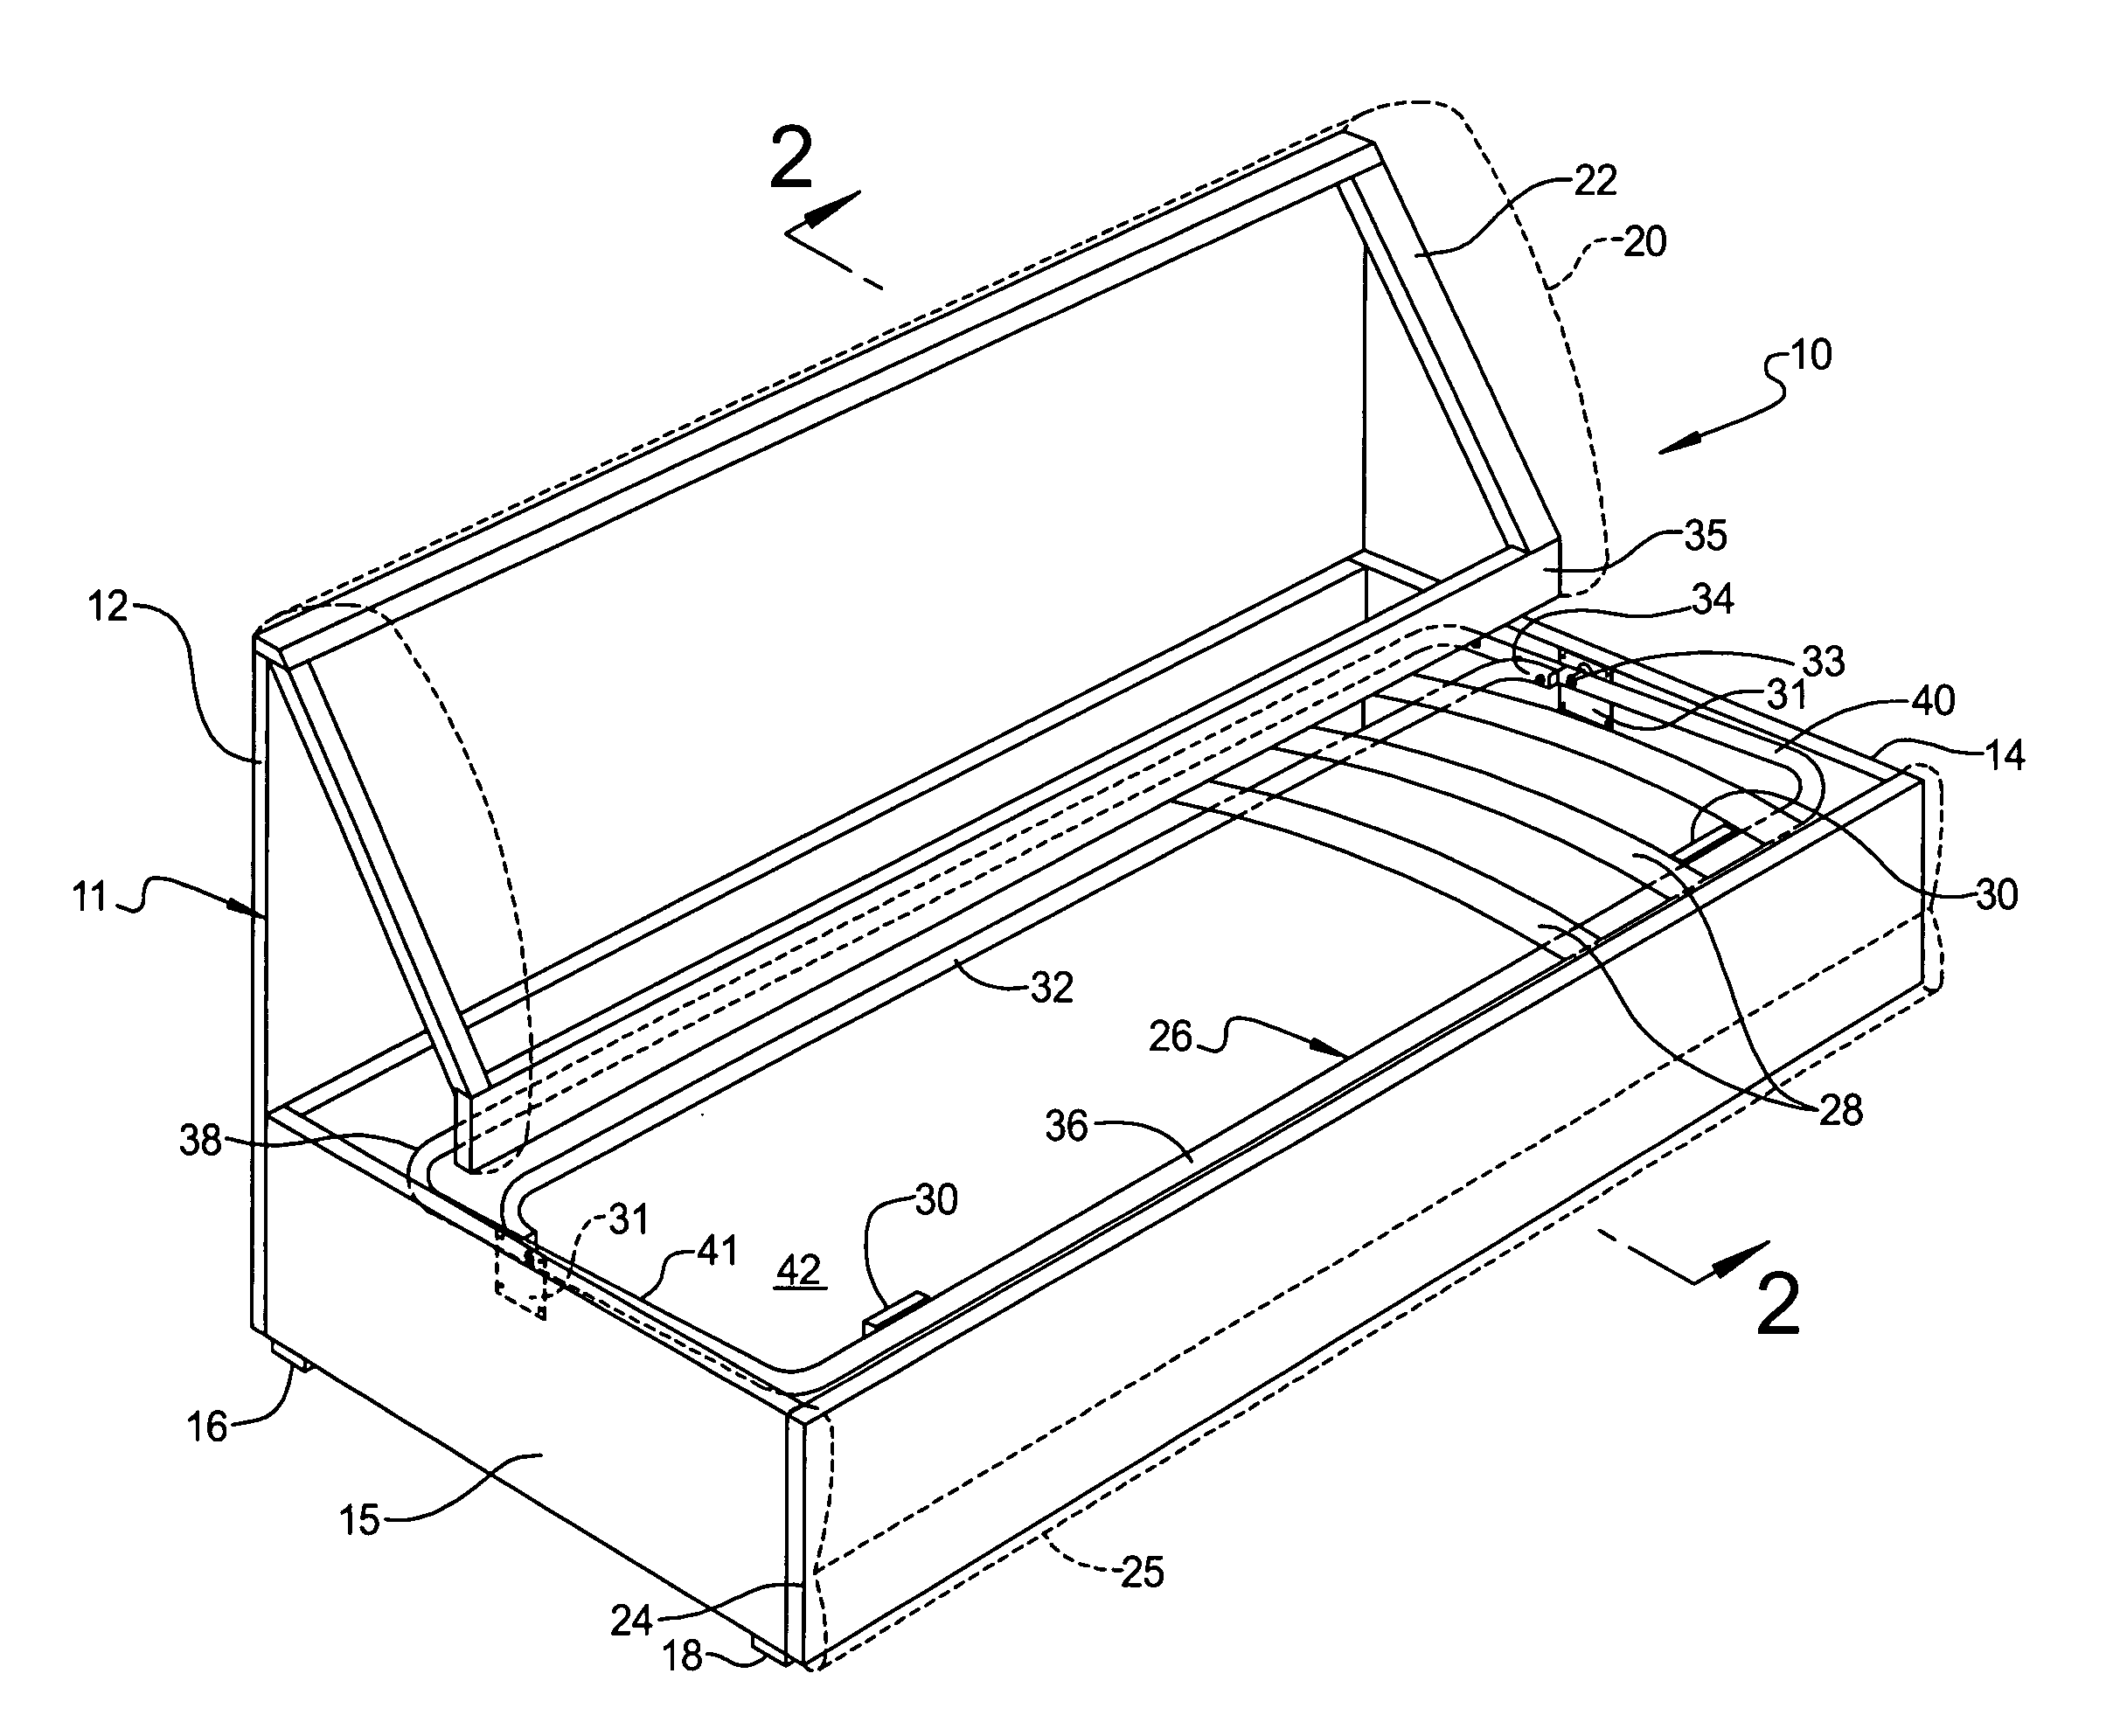 Access and support system for convertible furniture